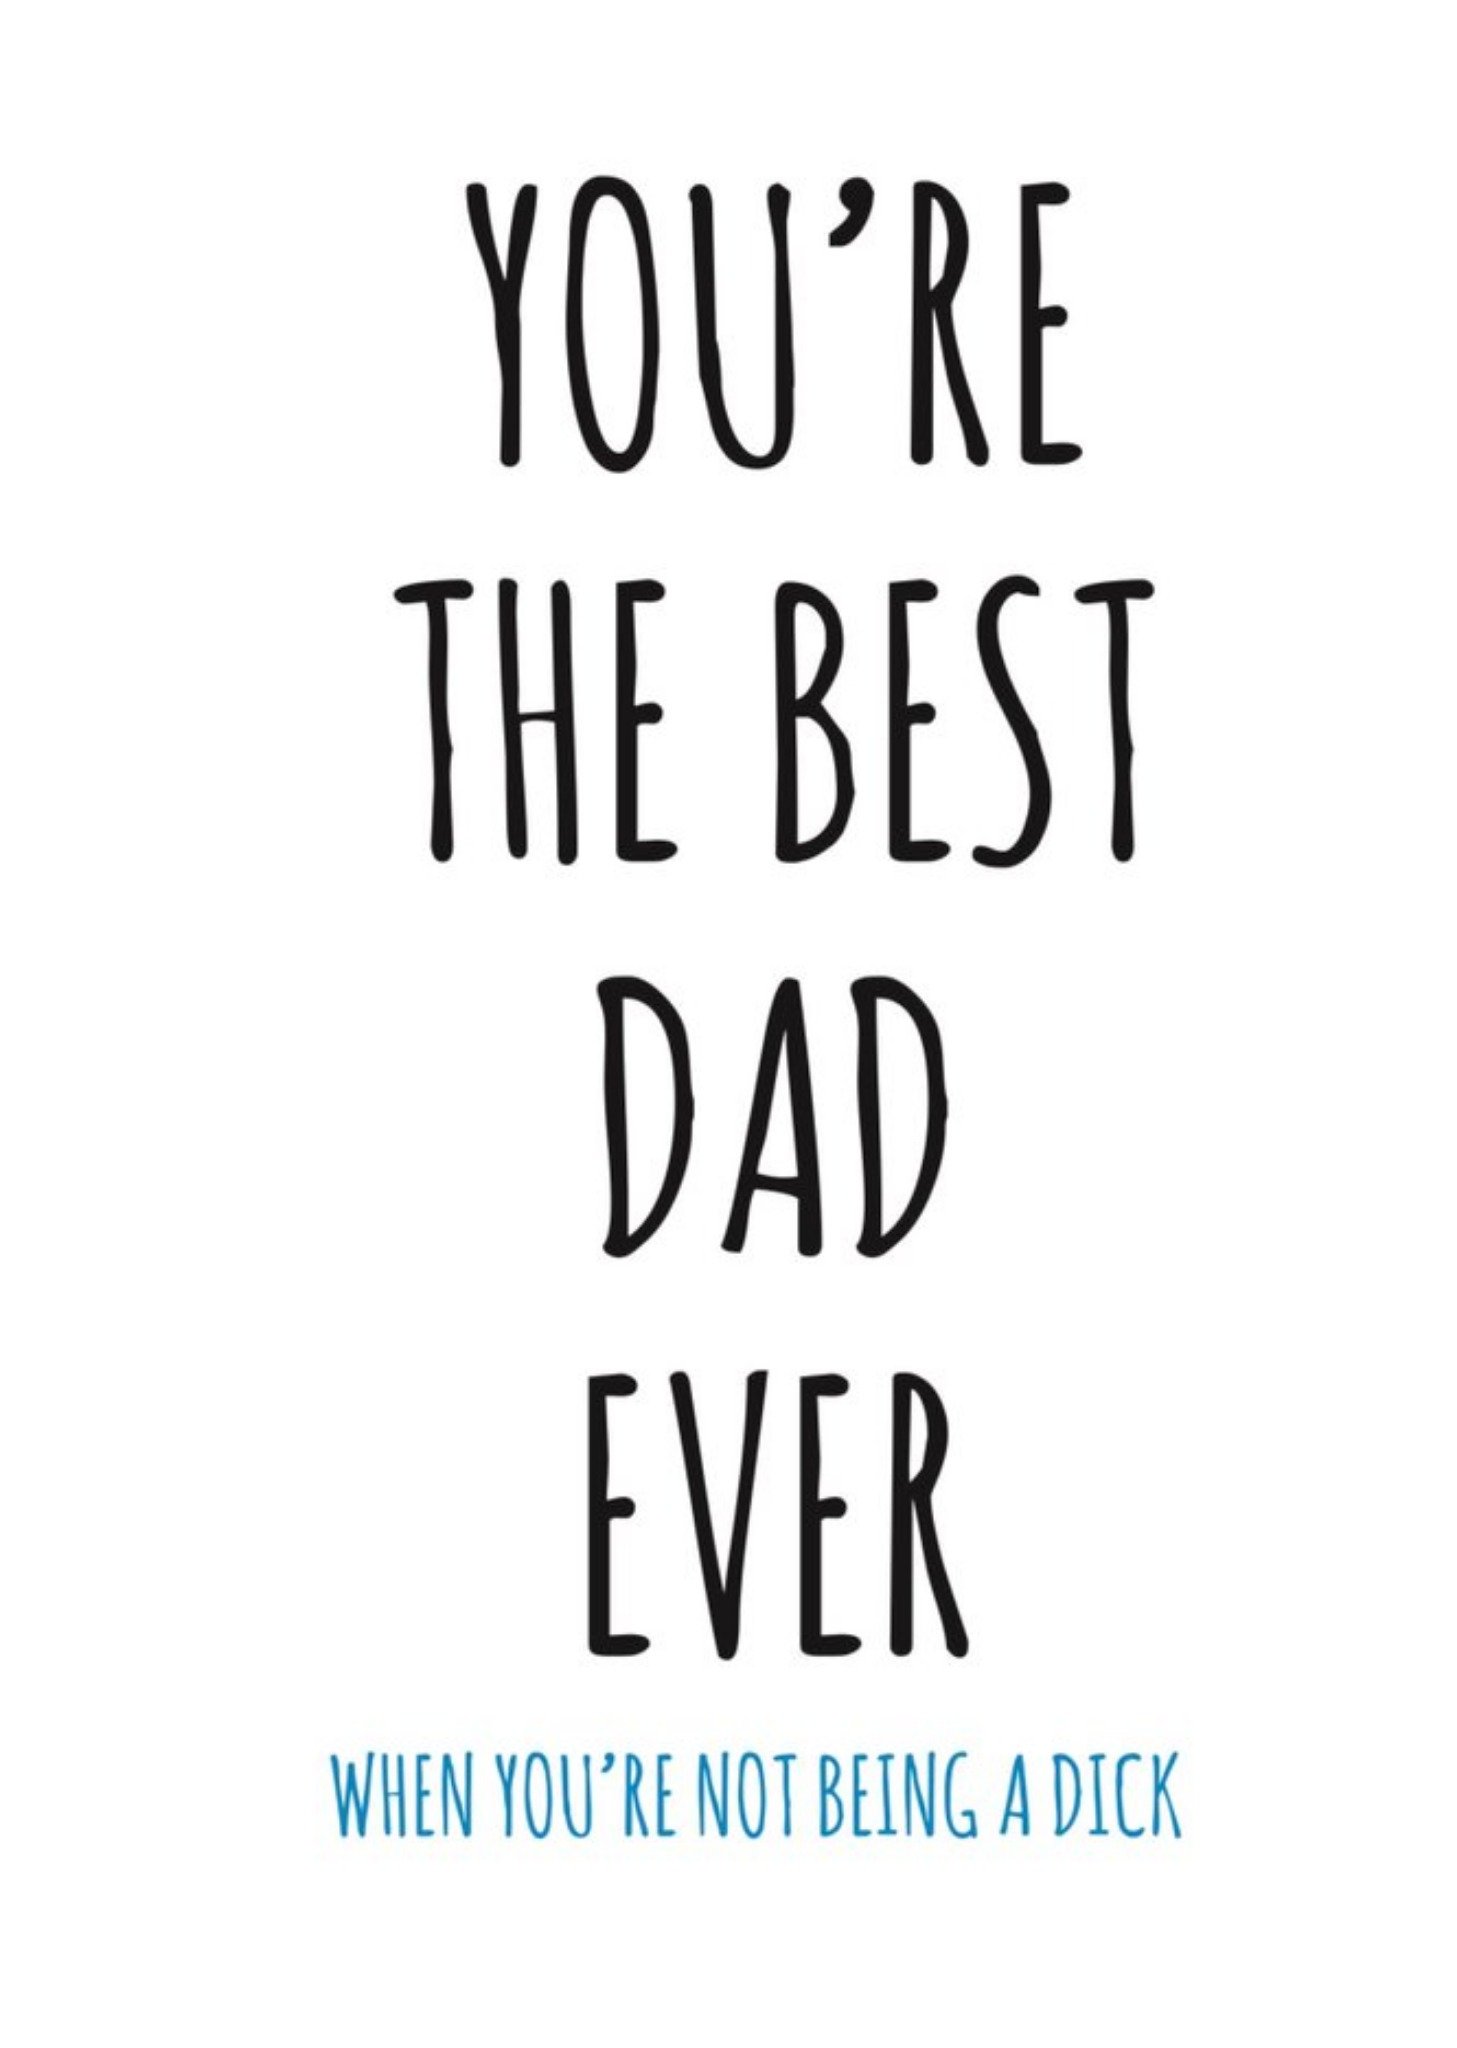 Banter King Typographical Youre The Best Dad Ever When Youre Not Being A Dick Card Ecard